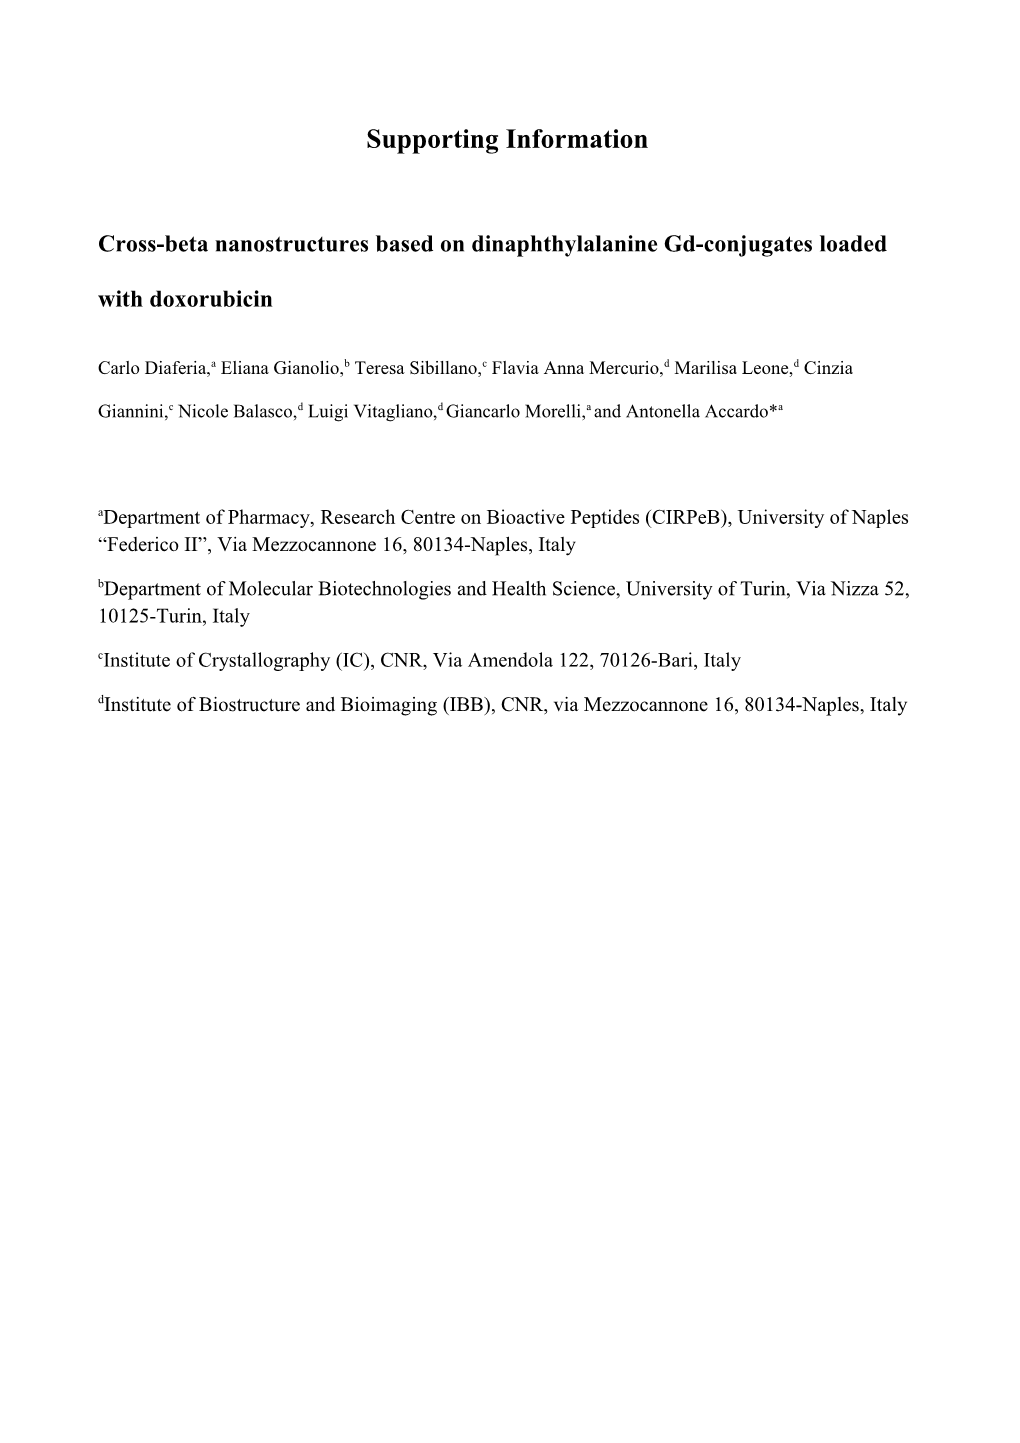 Cross-Beta Nanostructures Based on Dinaphthylalanine Gd-Conjugates Loaded with Doxorubicin